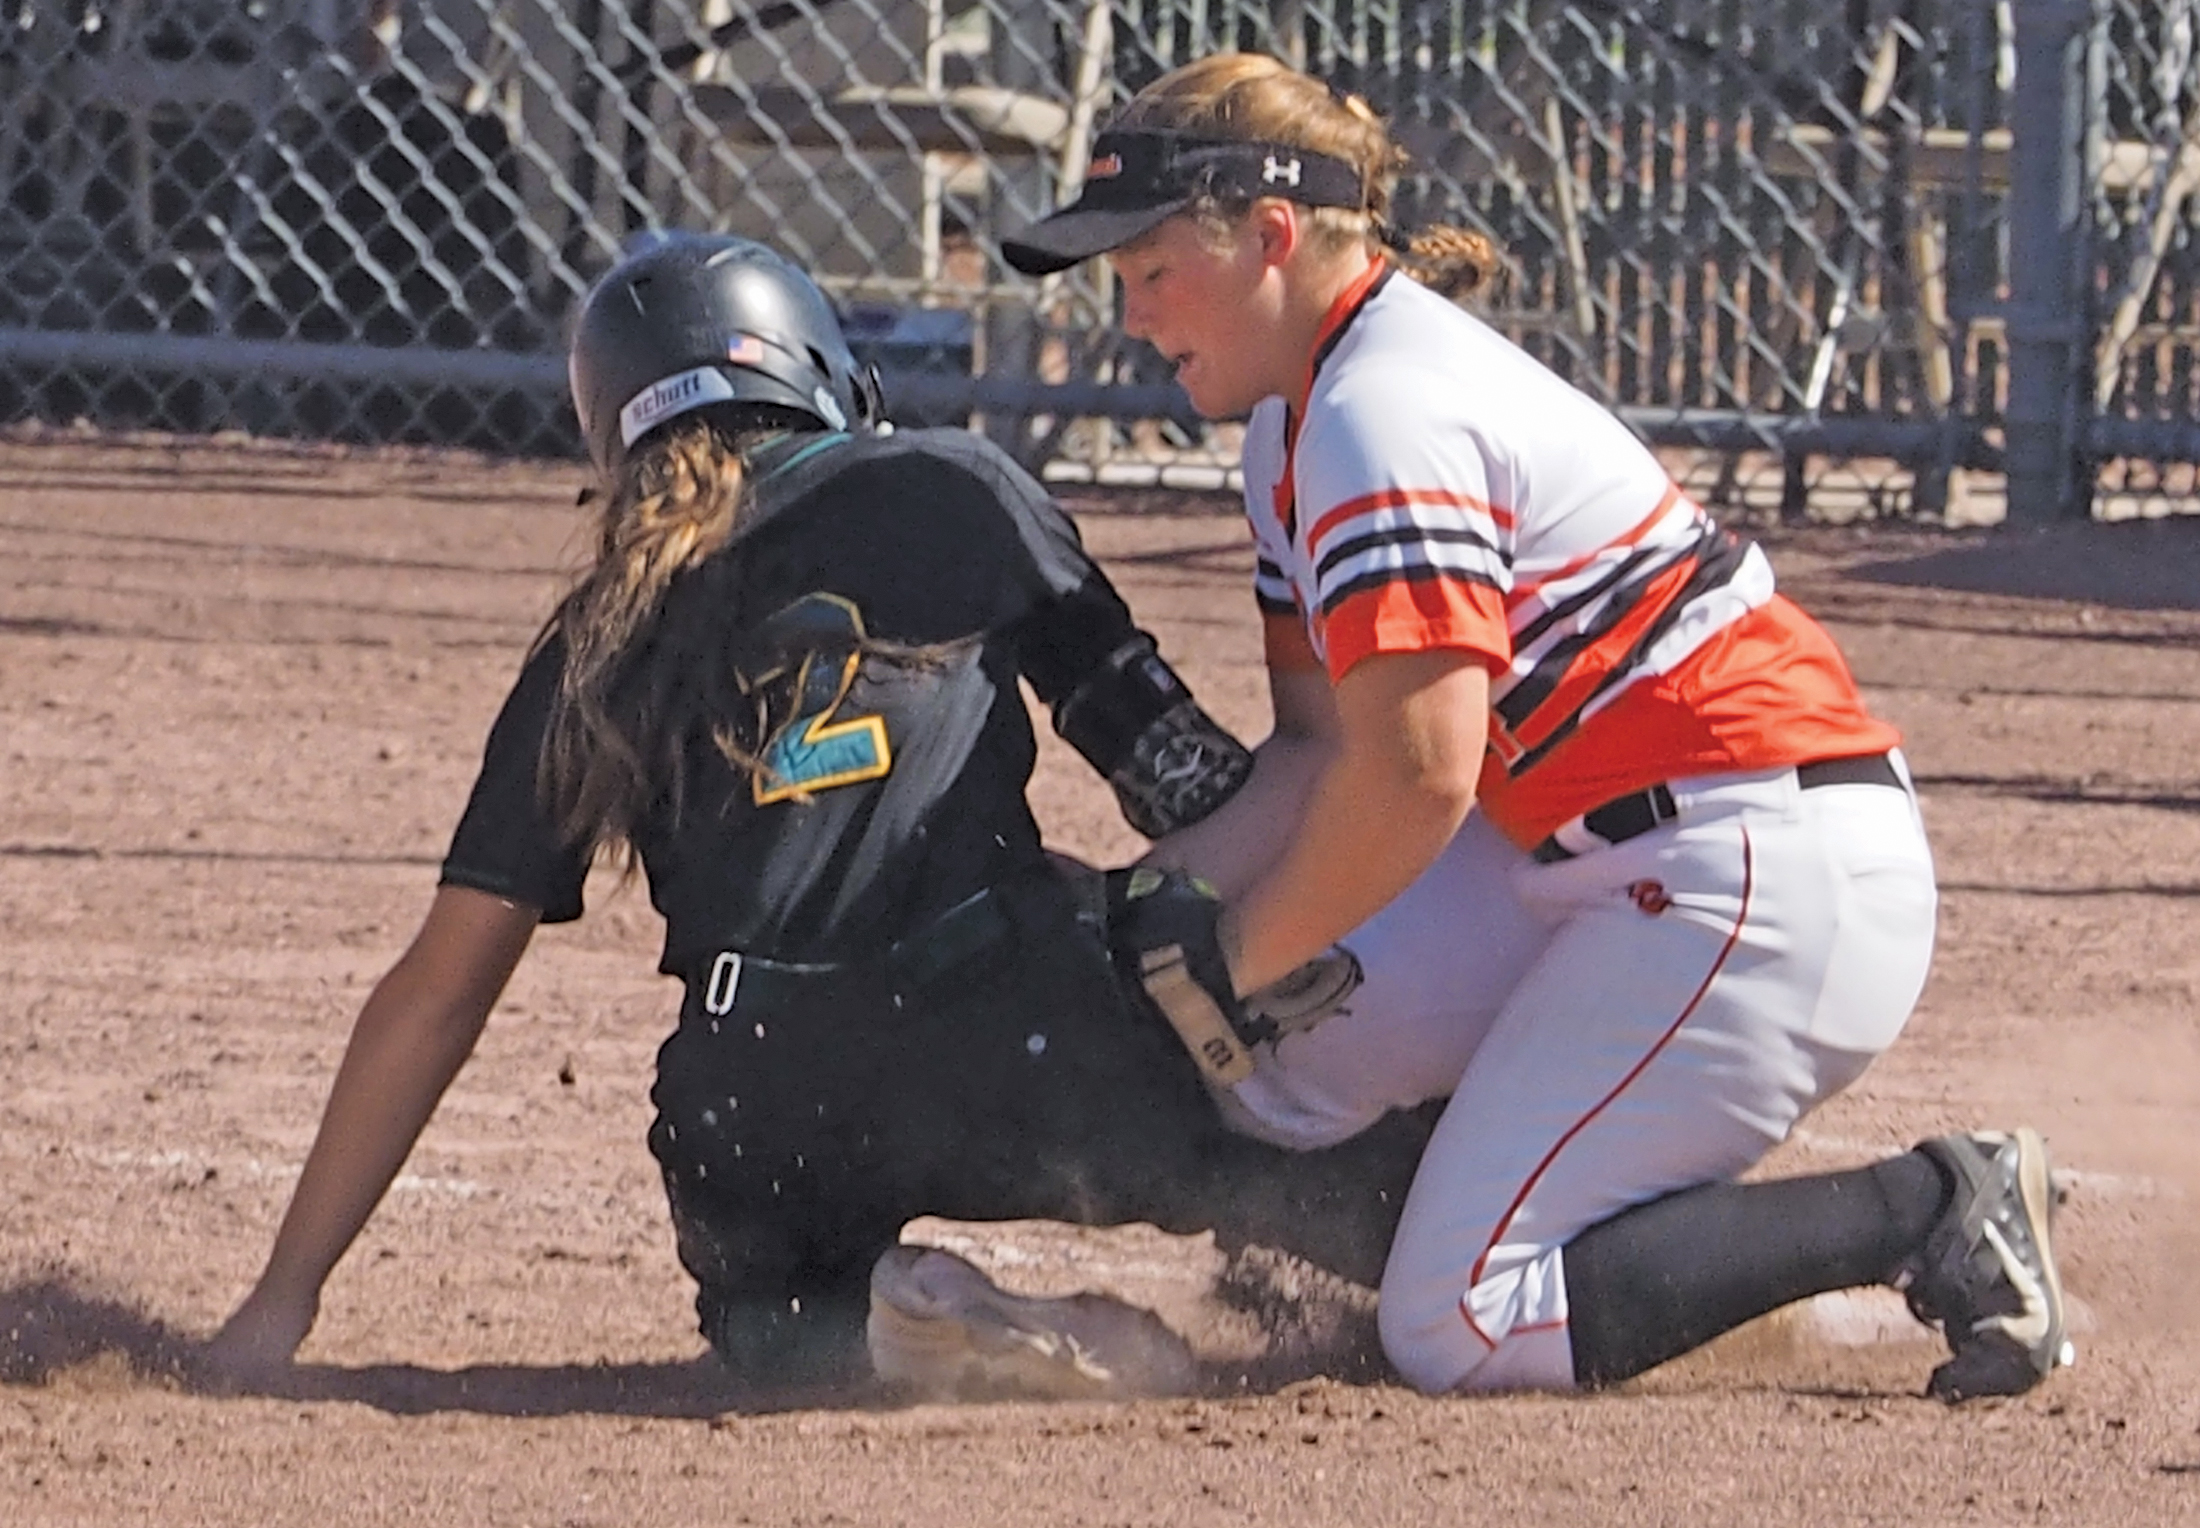 Comets fall to Huskies, 7-2, in first round of state tourney